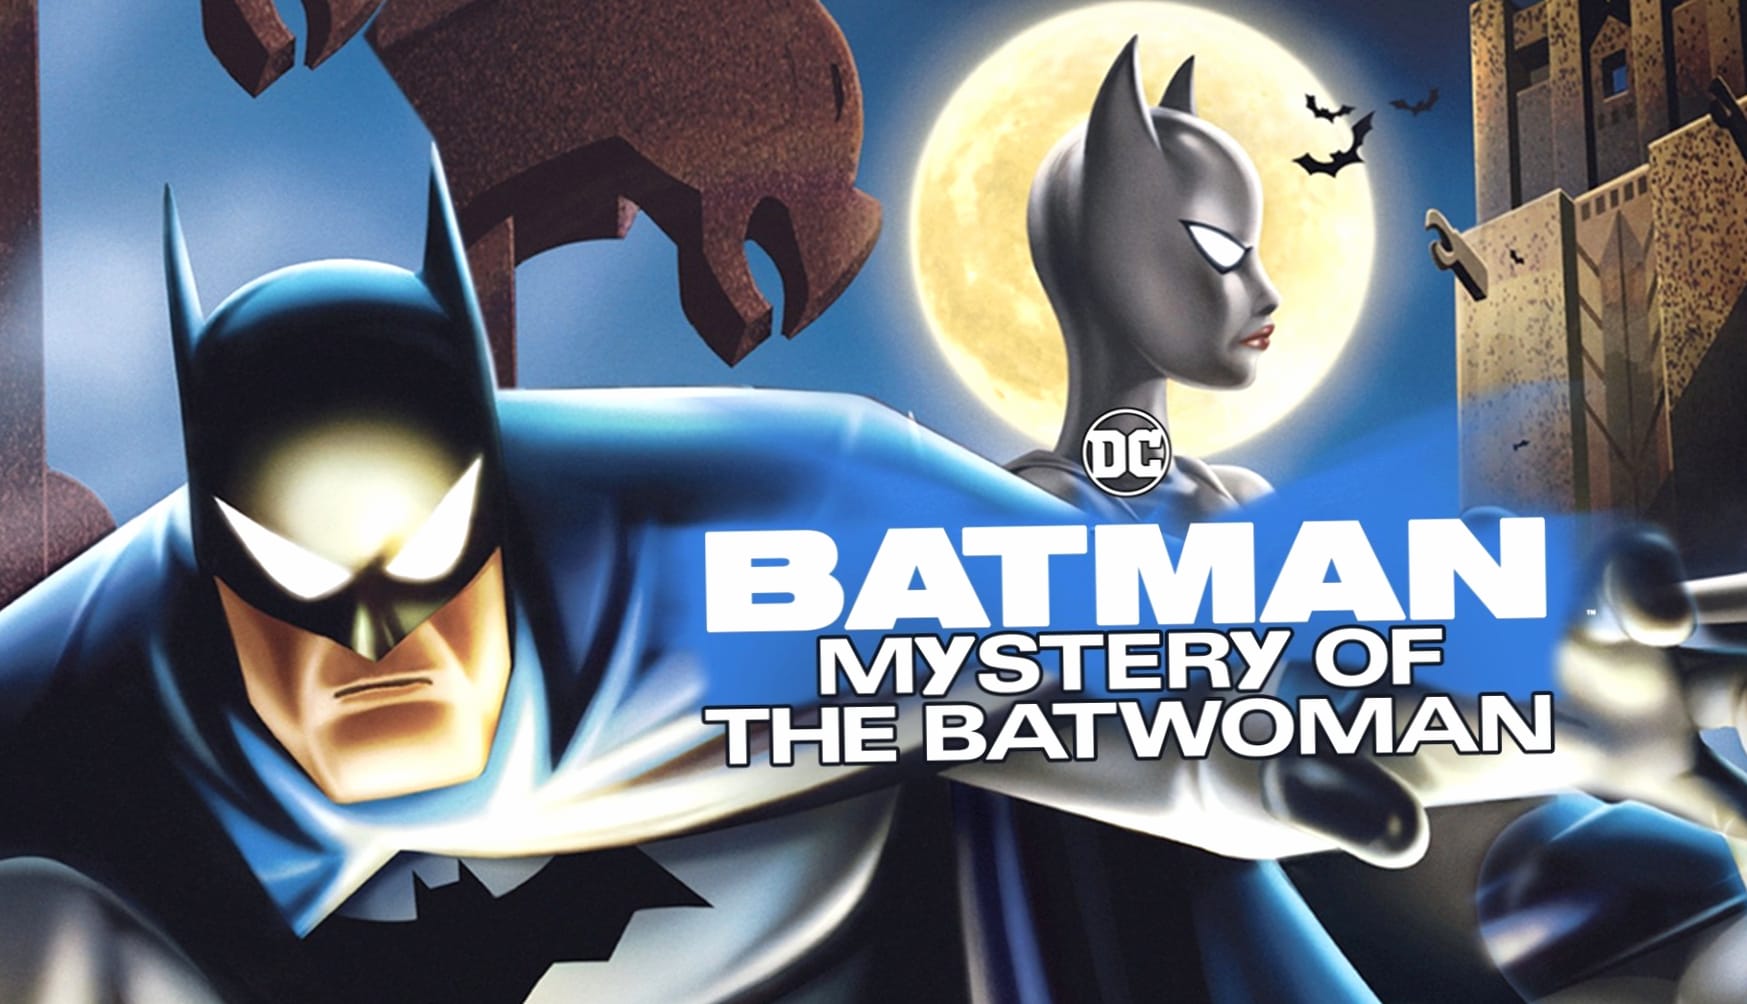 Batman Mystery of the Batwoman wallpapers HD quality